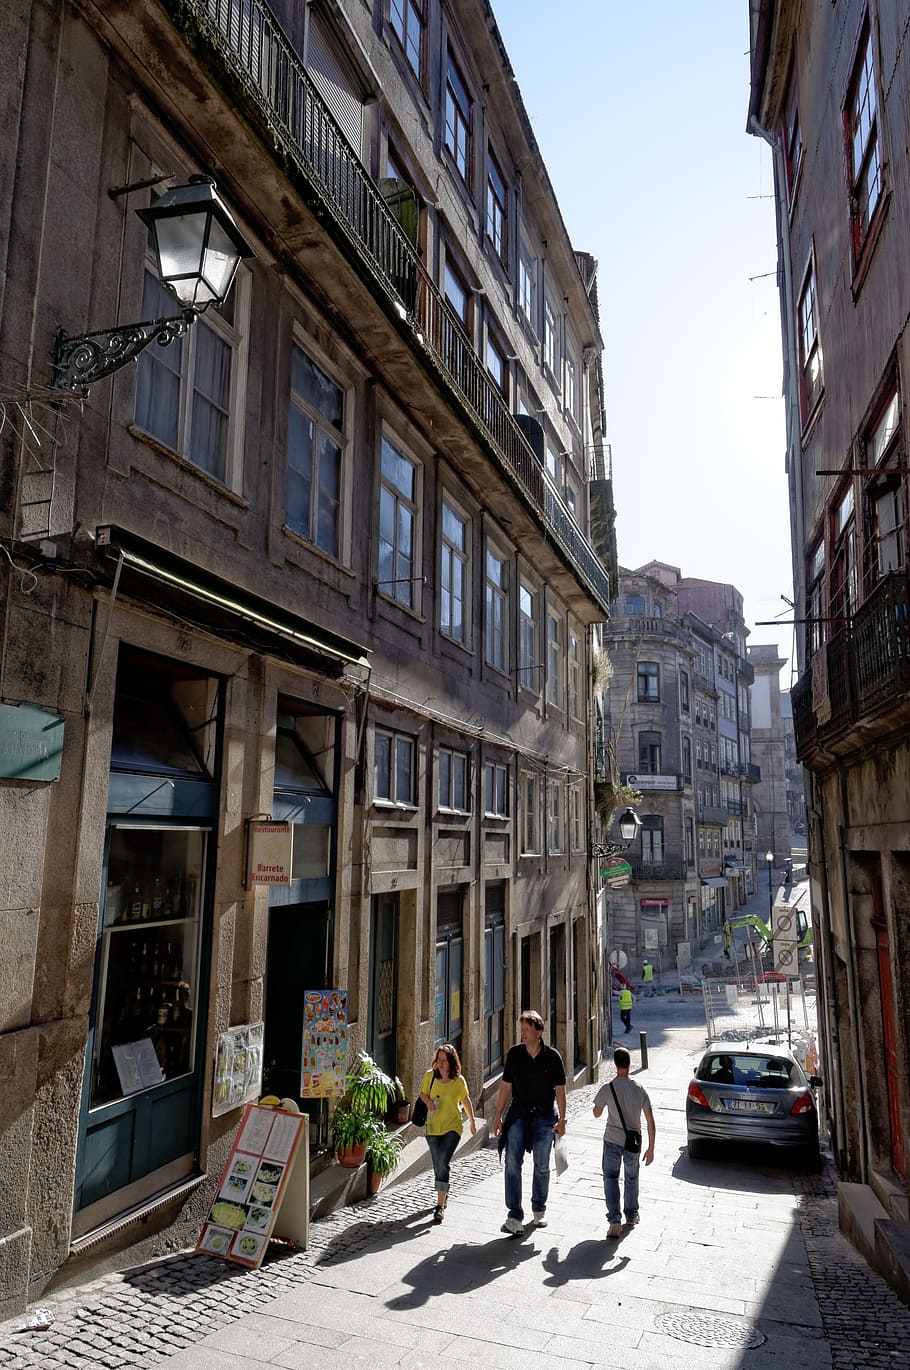 porto, douro, portugal, old town, historically, river, holiday, travel, historic old town, facade